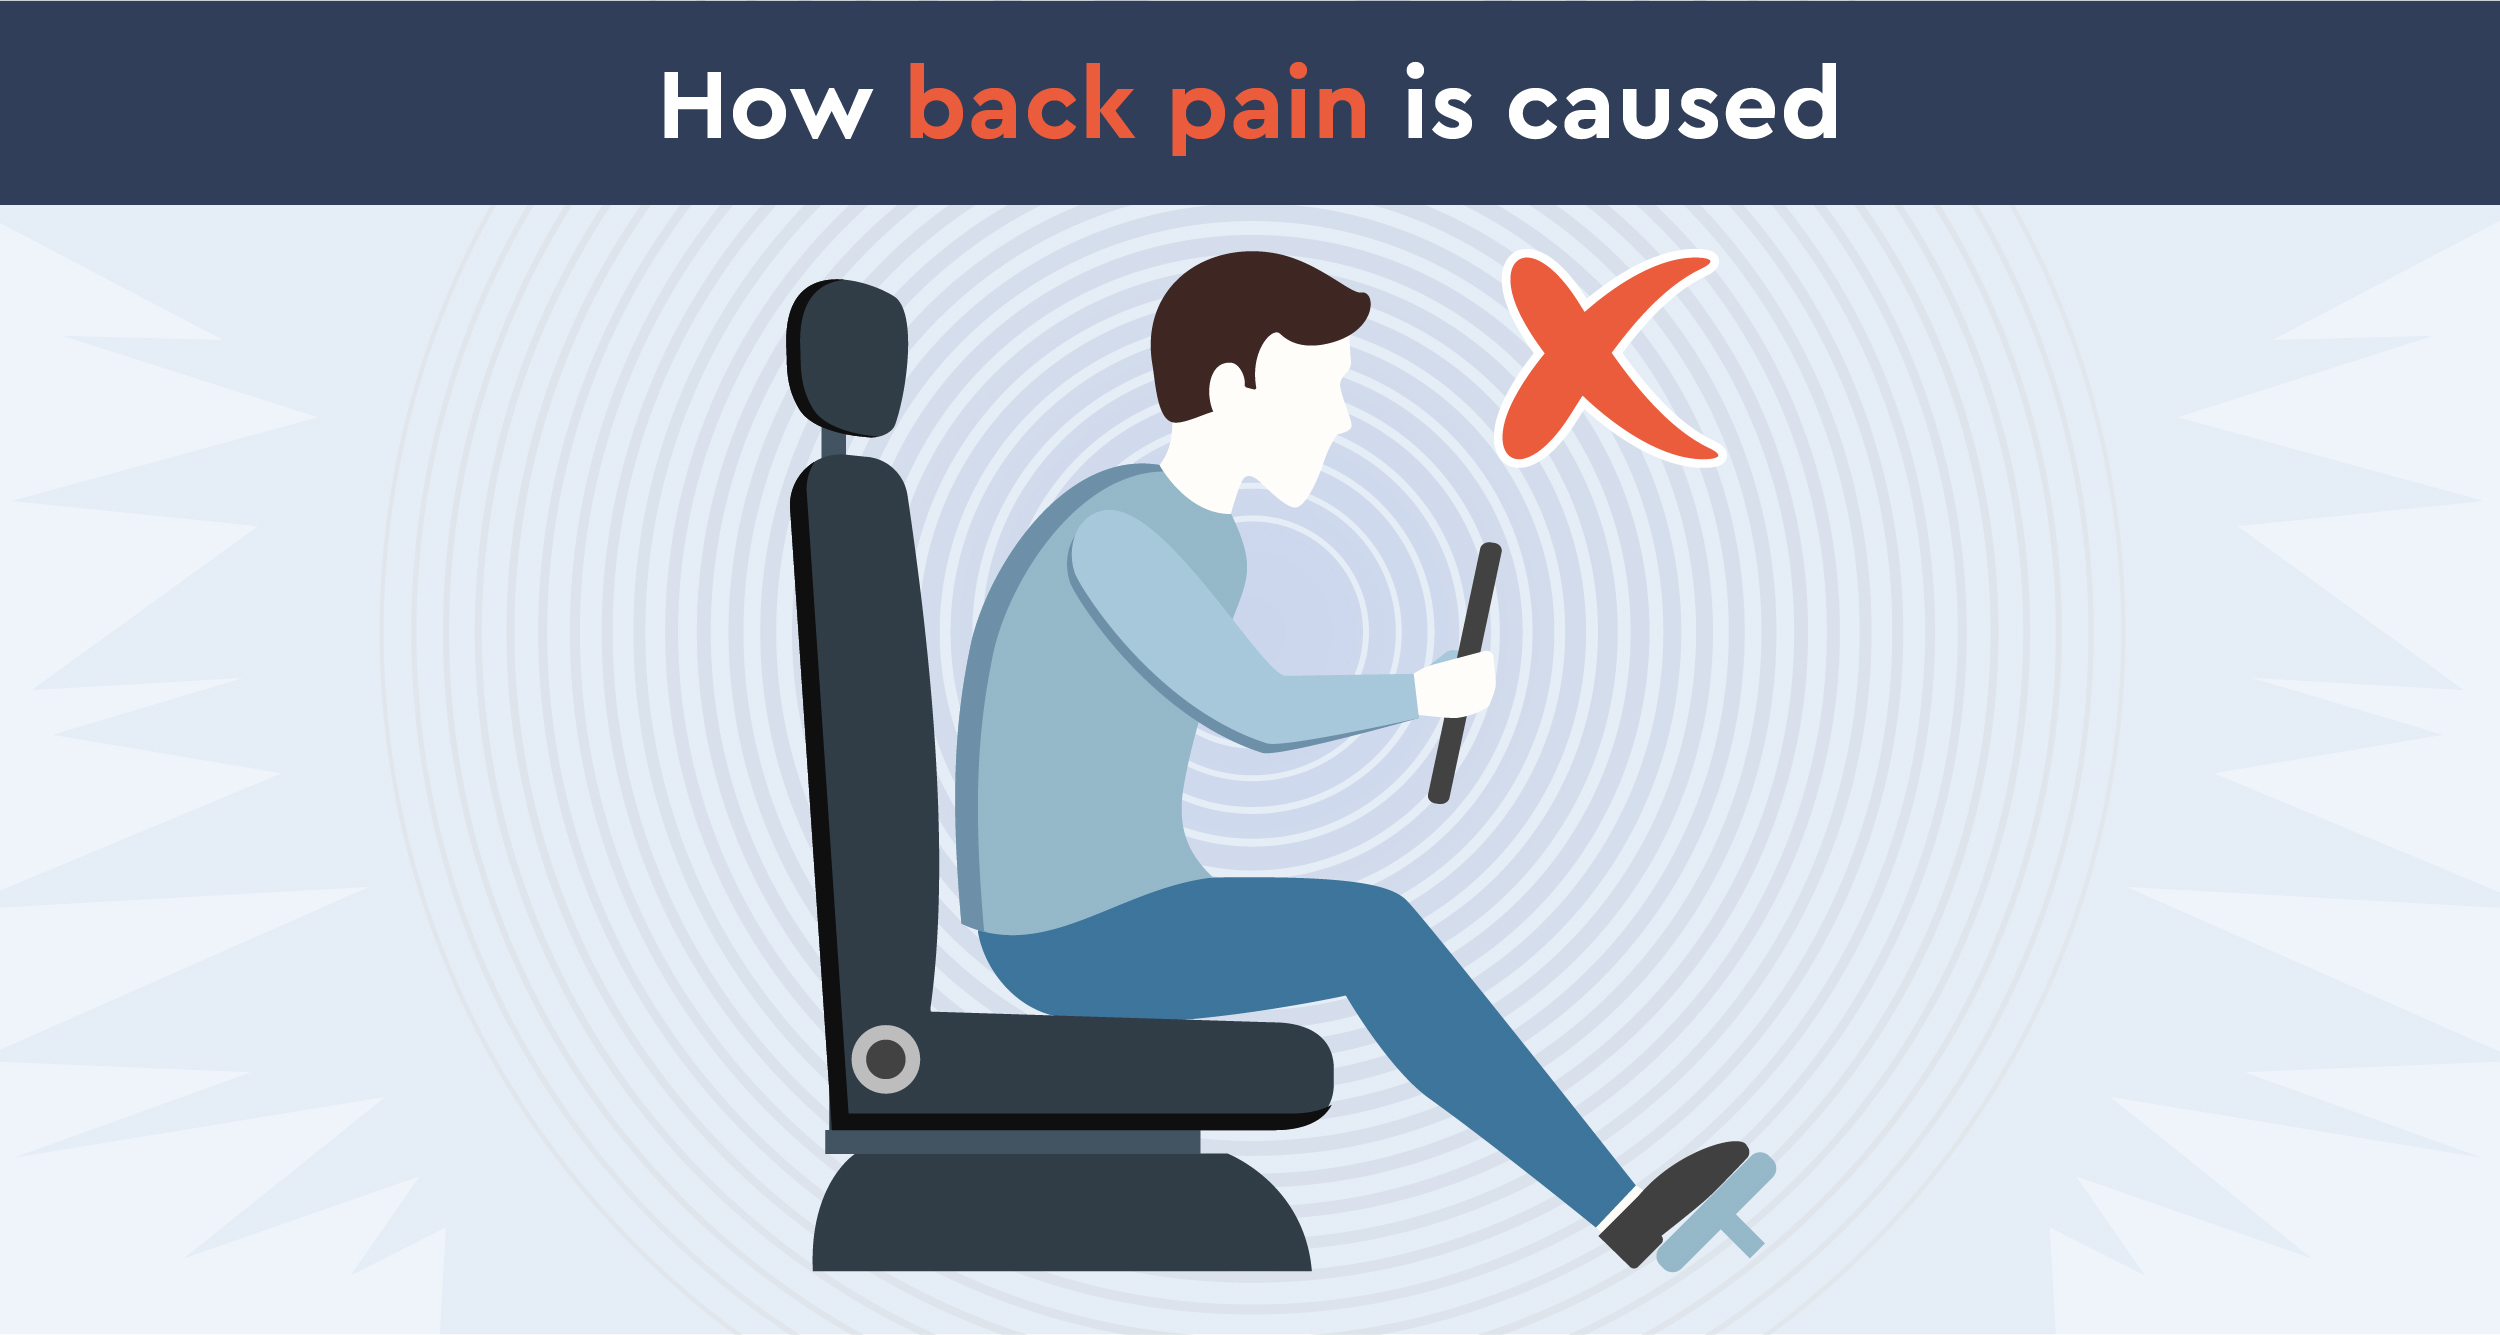 How back pain is caused